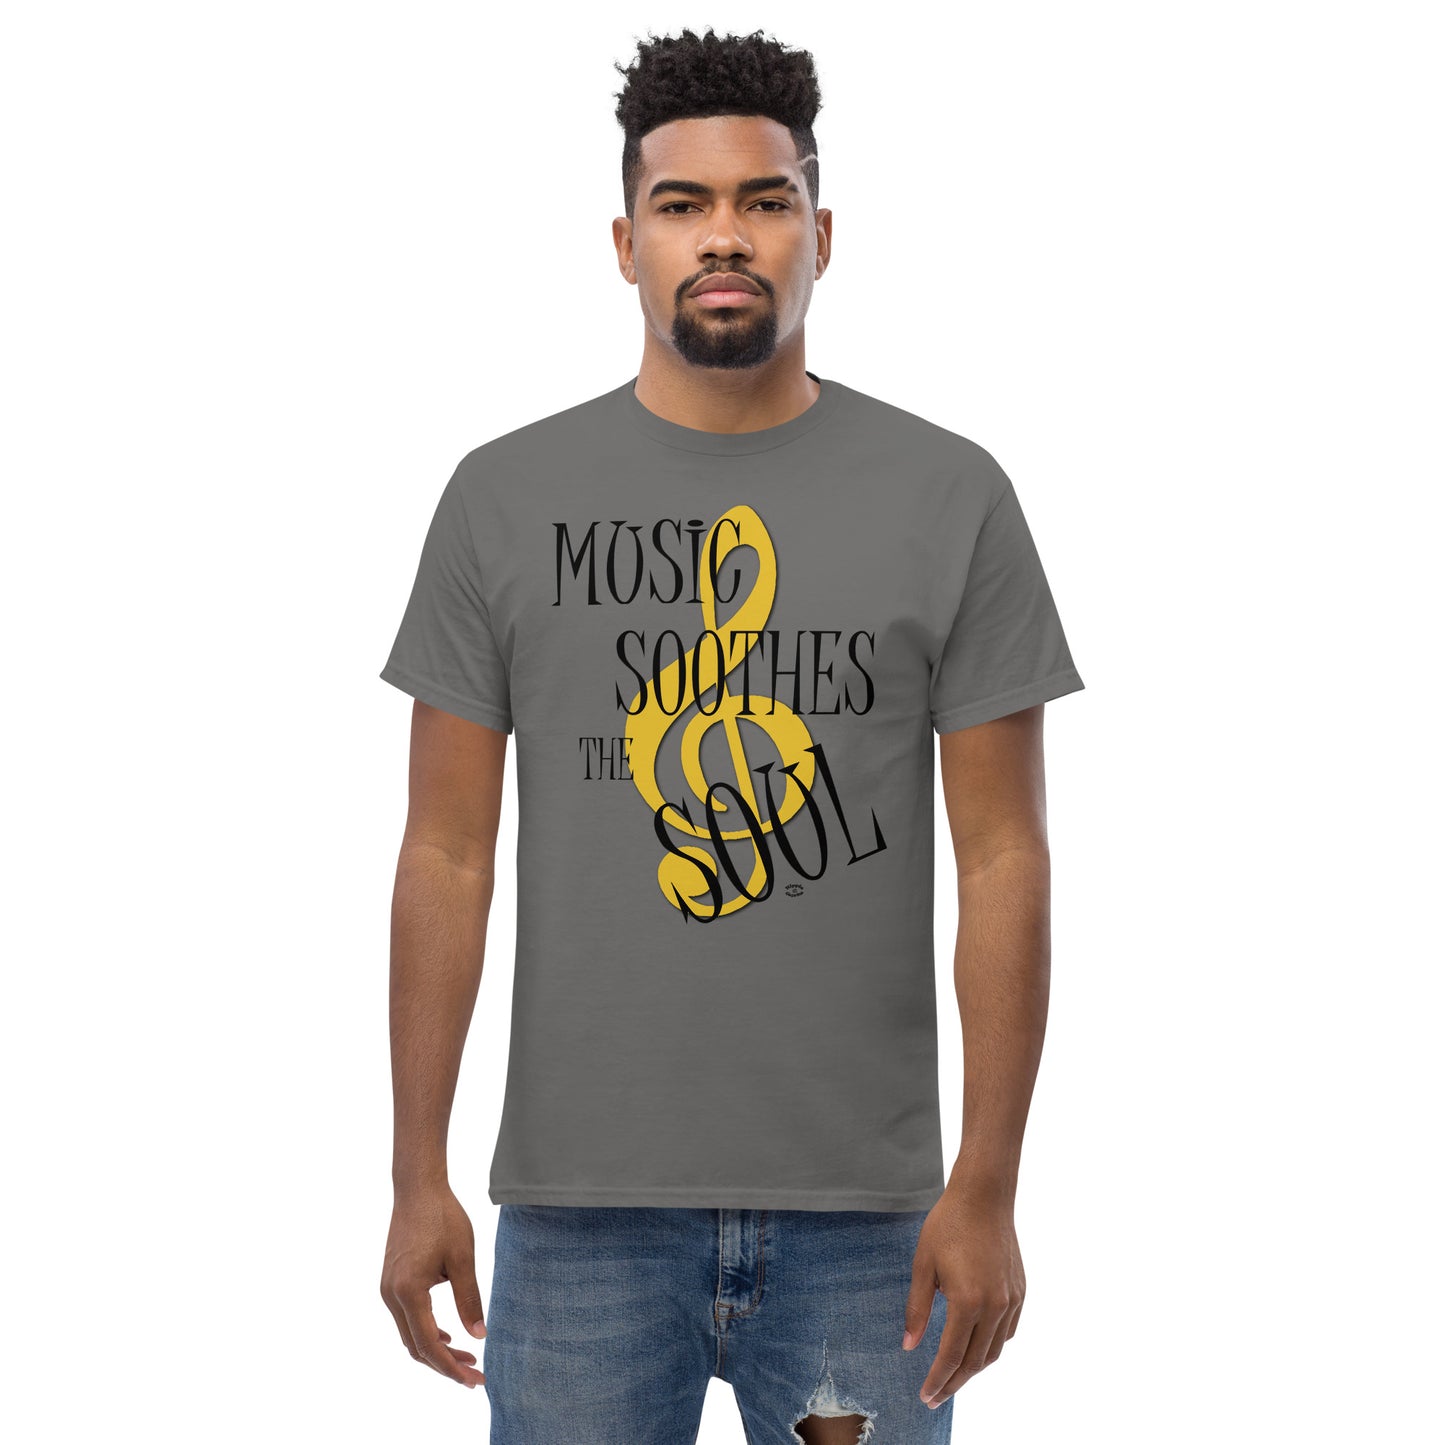 "Music Soothes The Soul" Men's Classic Tee